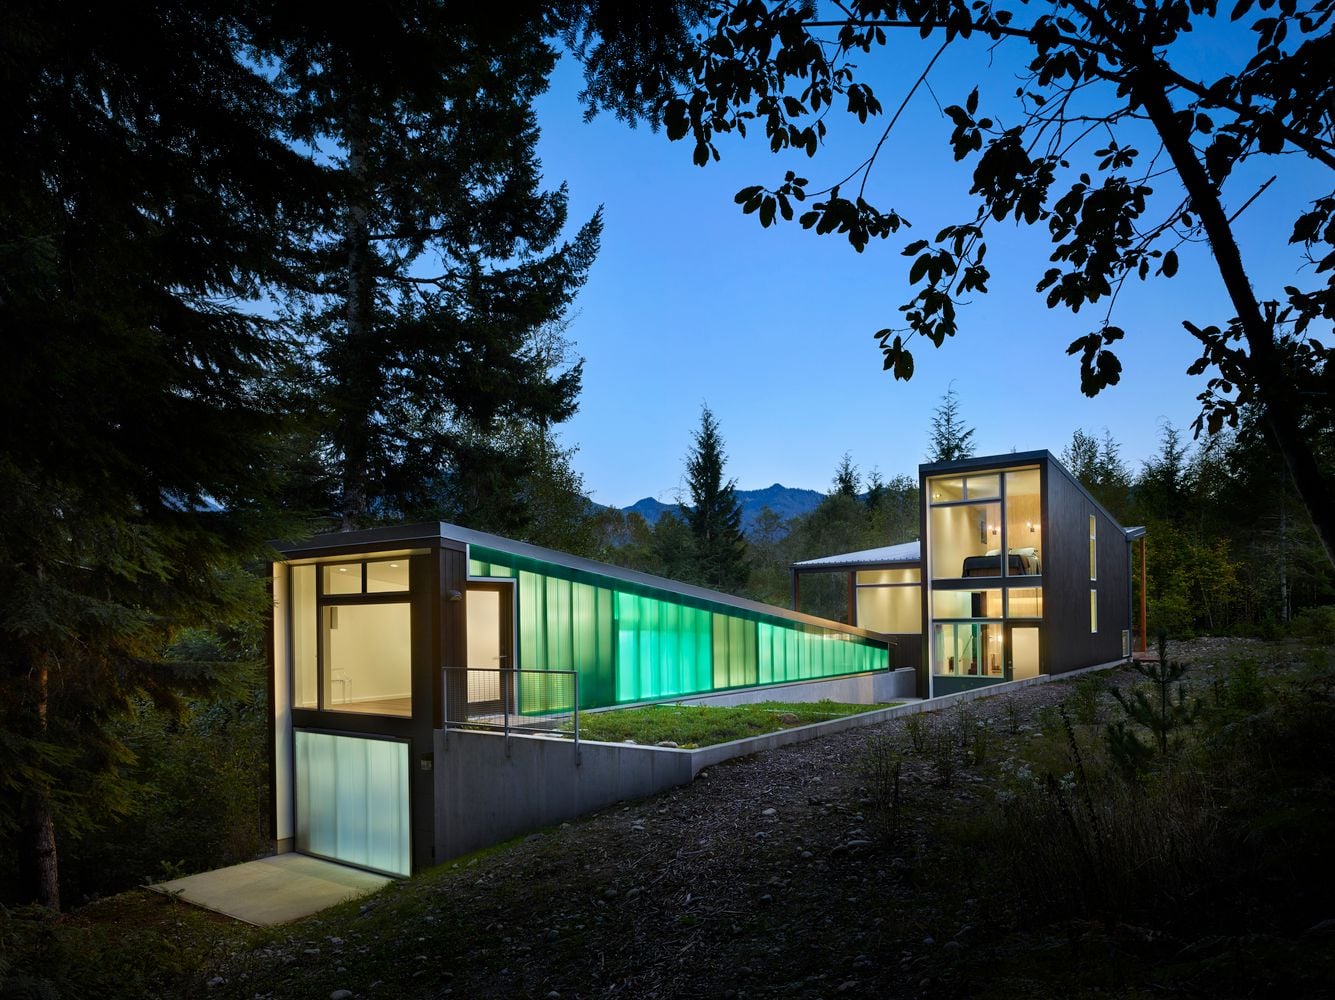 Bear Run Cabin emits a ghostly green glow in the evening darkness. 